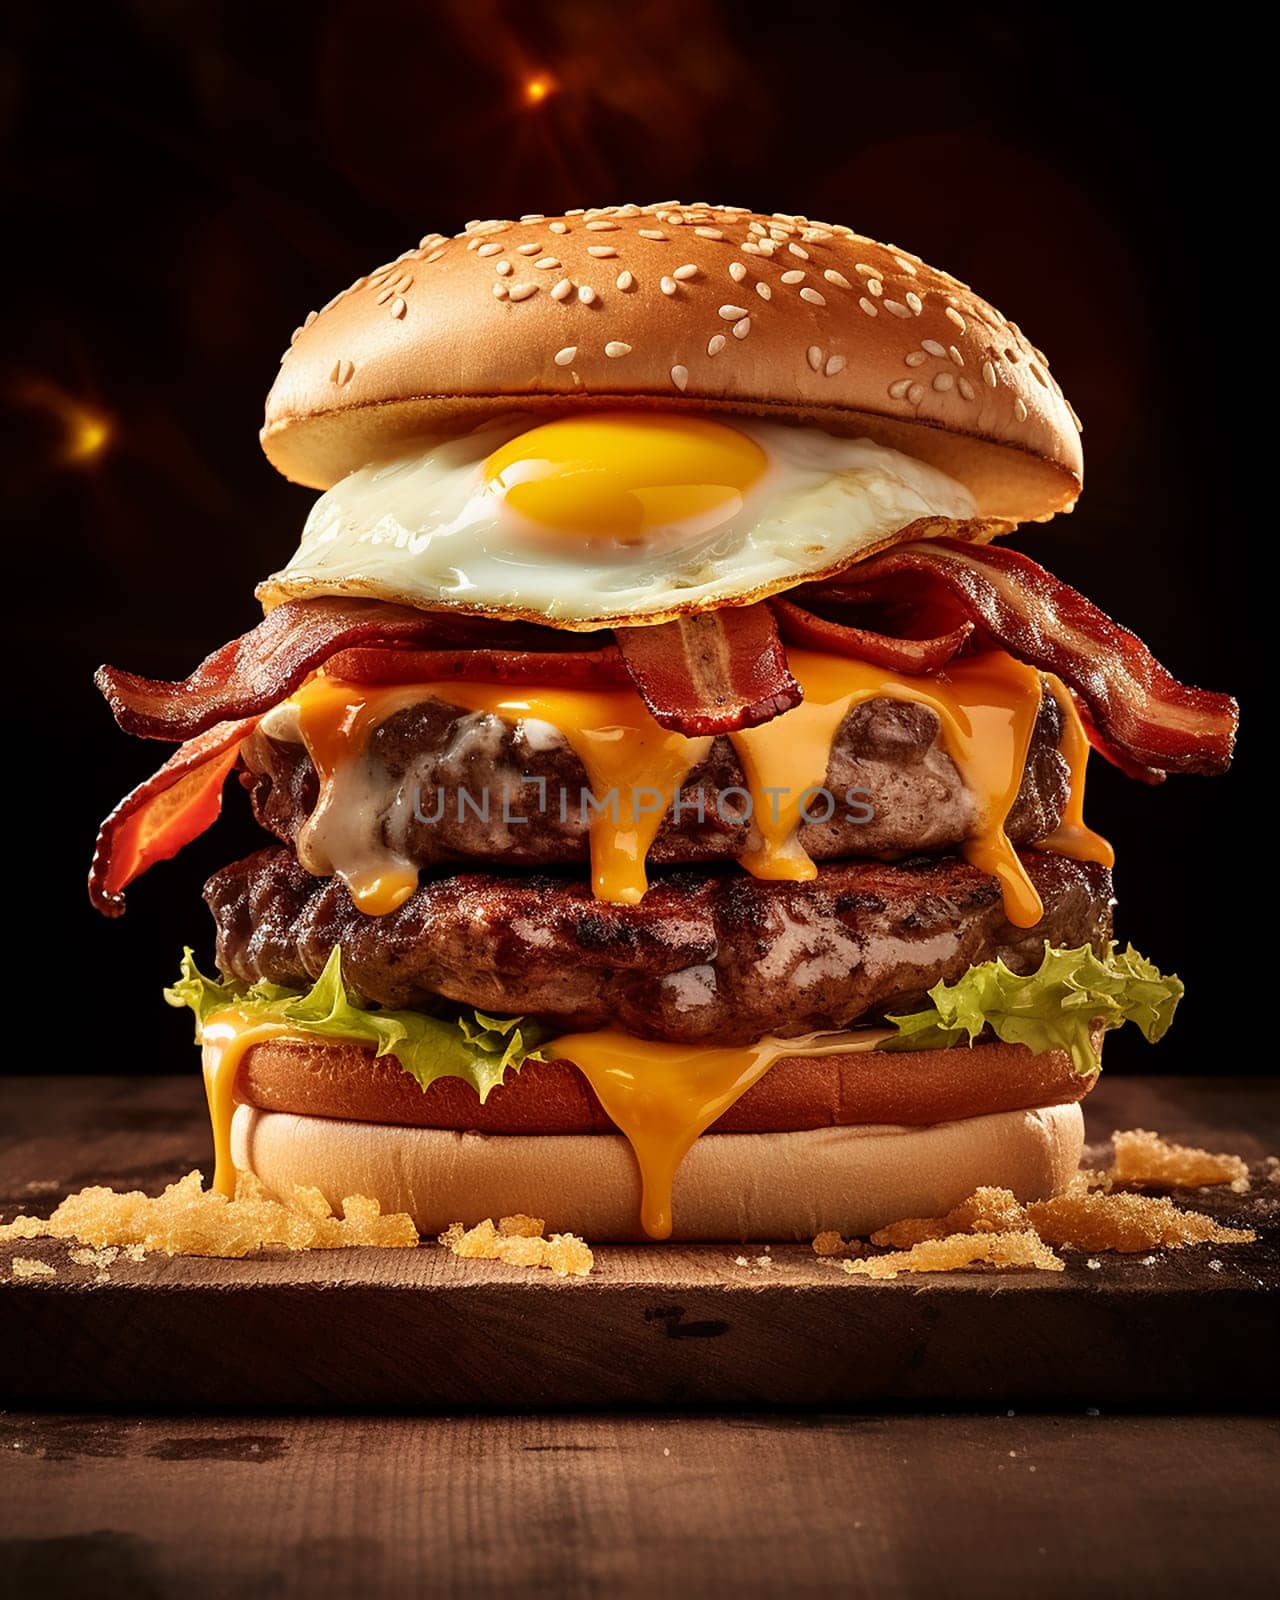 Mouthwatering double bacon cheeseburger with a fried egg on top